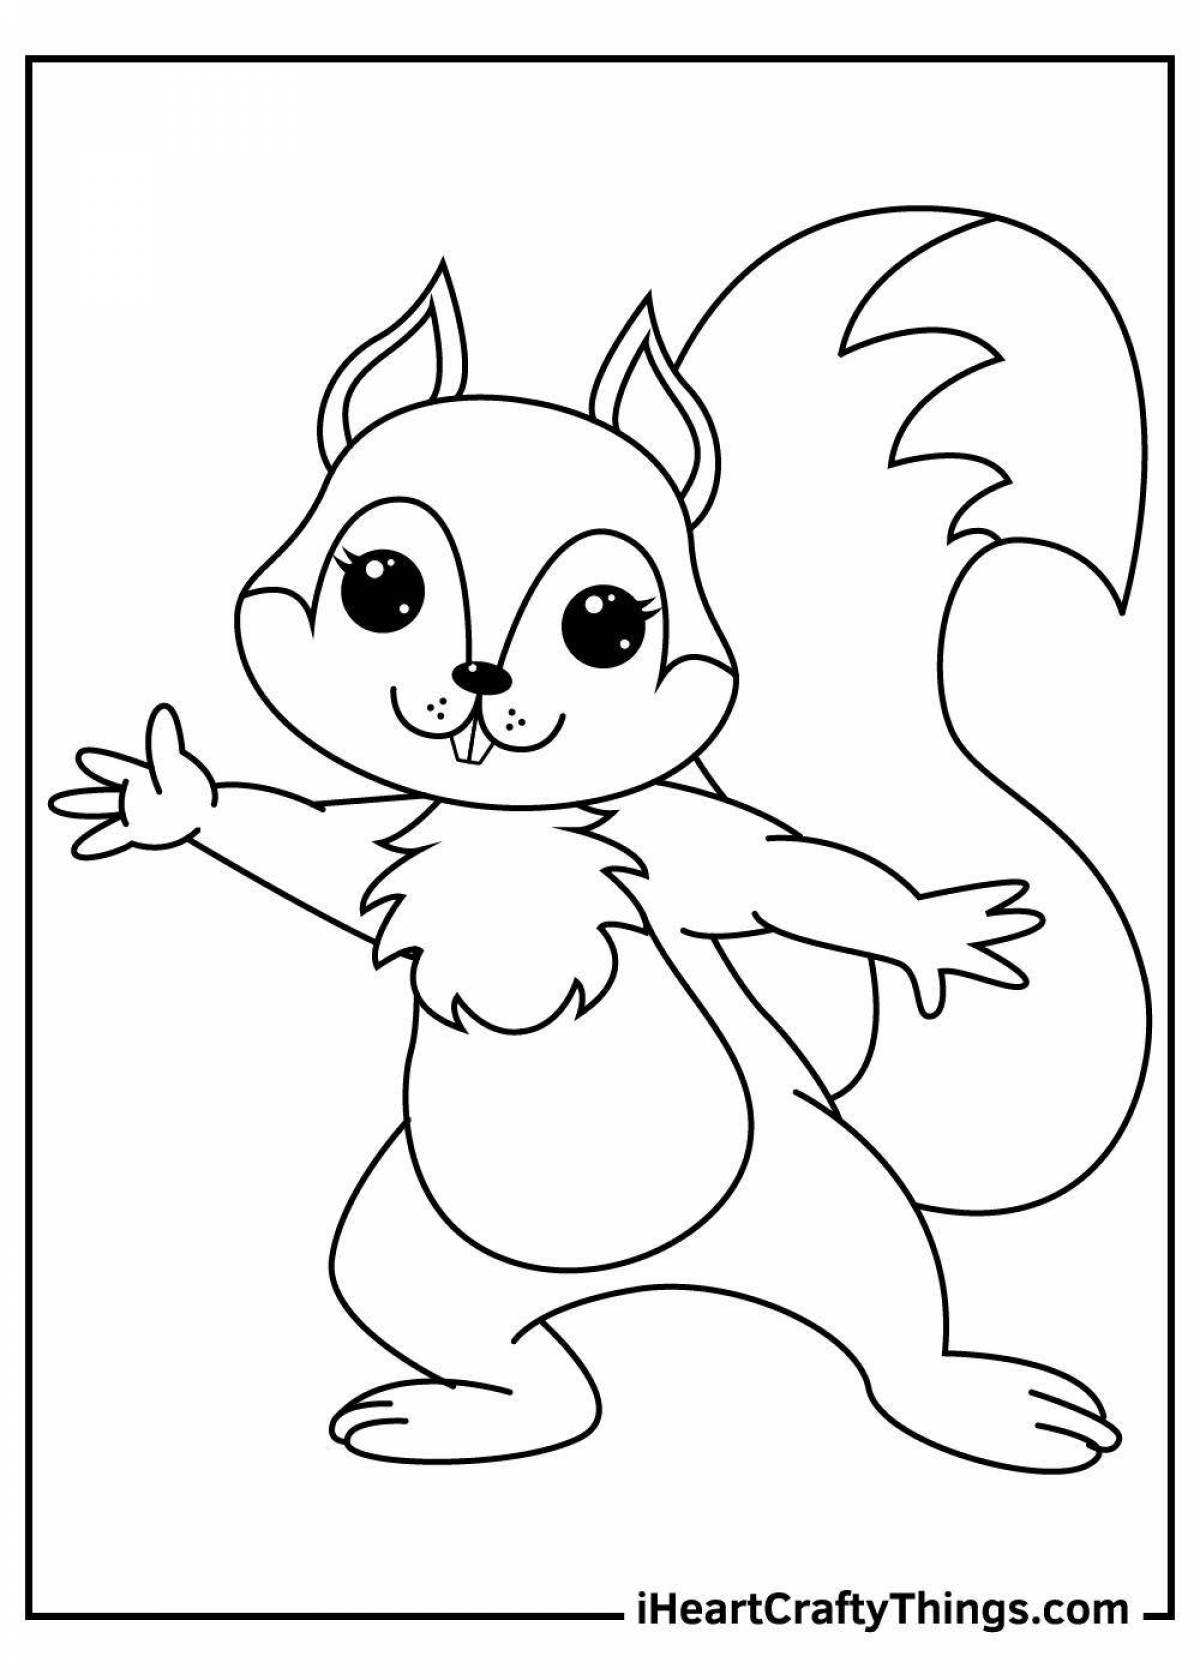 Exquisite squirrel coloring book for 2-3 year olds